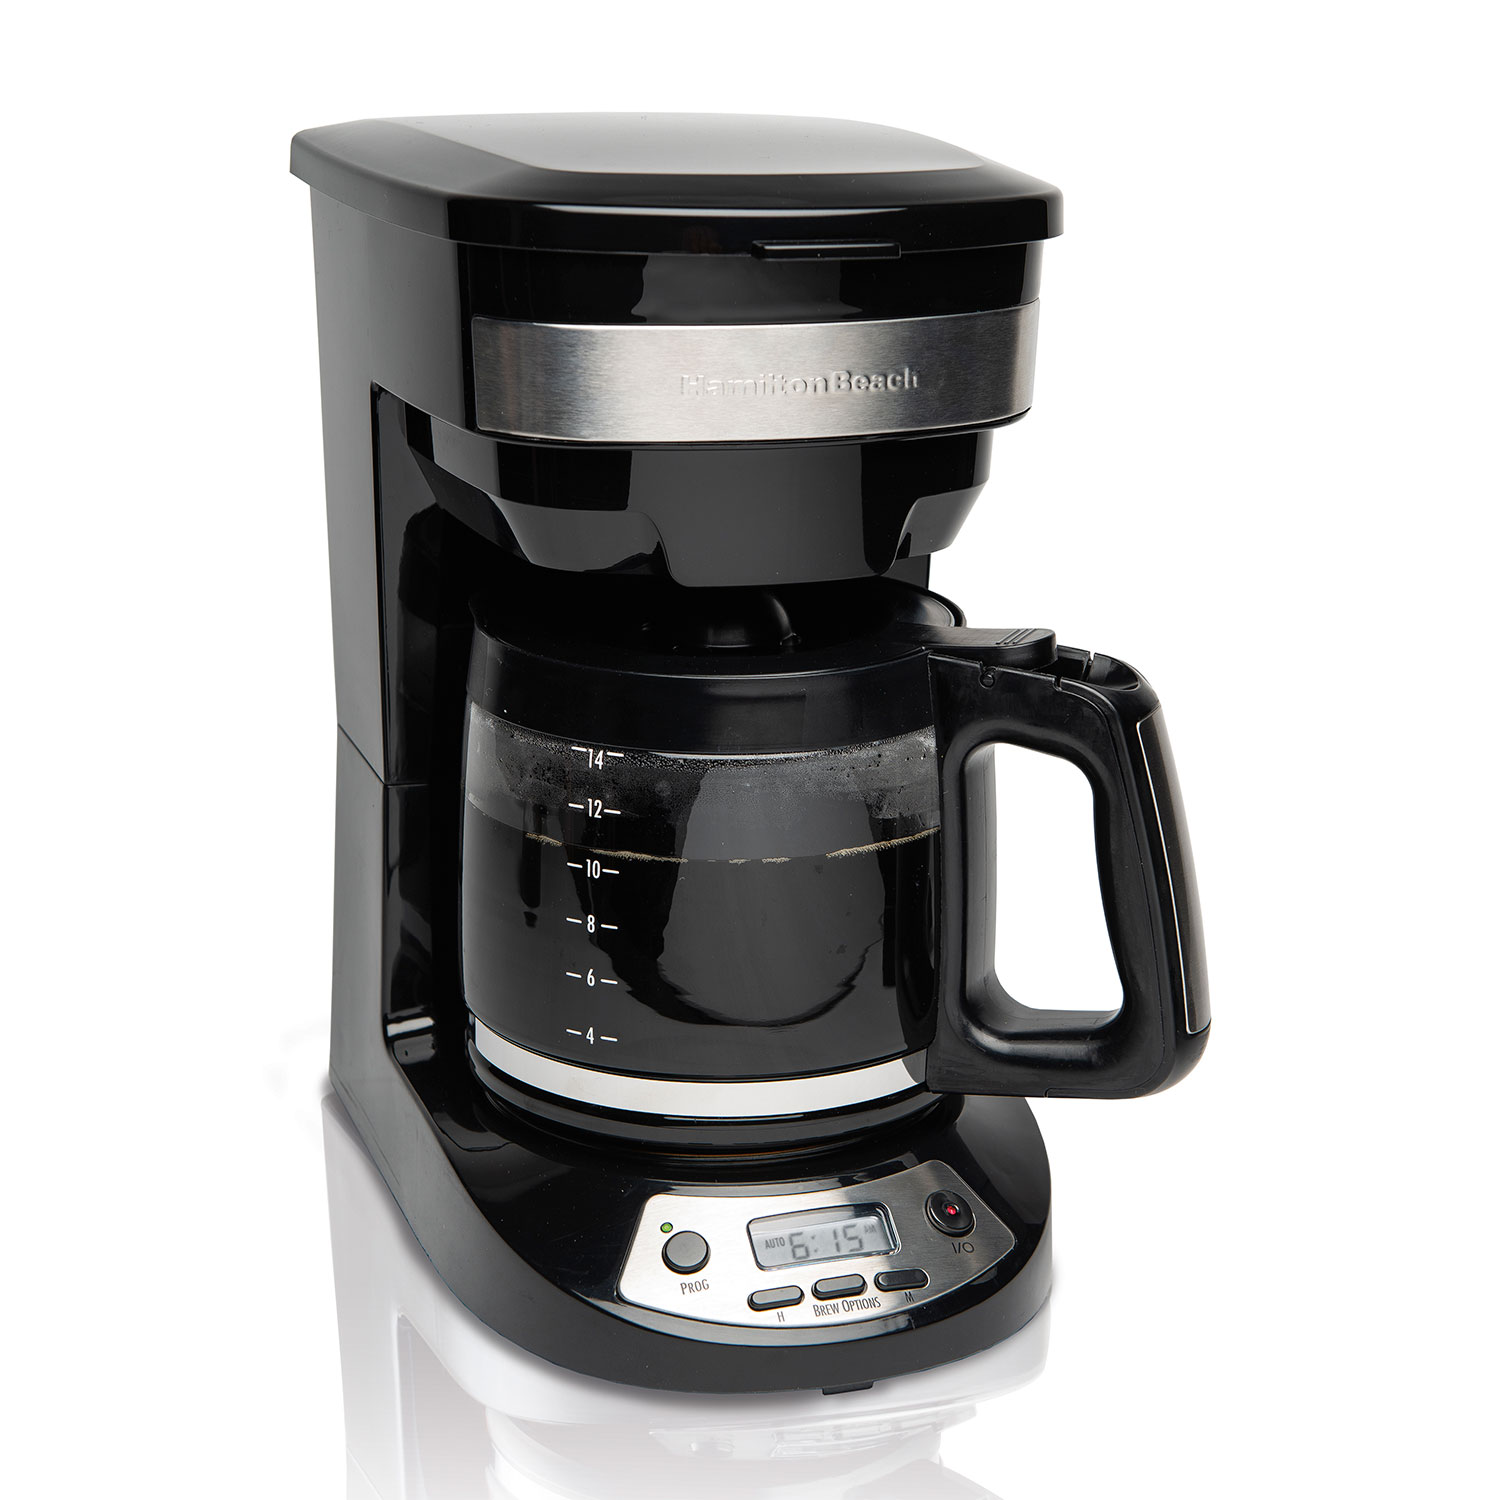 Programmable Grind and Brew 12 Cup Coffee Maker with Built-in Self-Rinsing Coffee Grinder (Black) (45505)